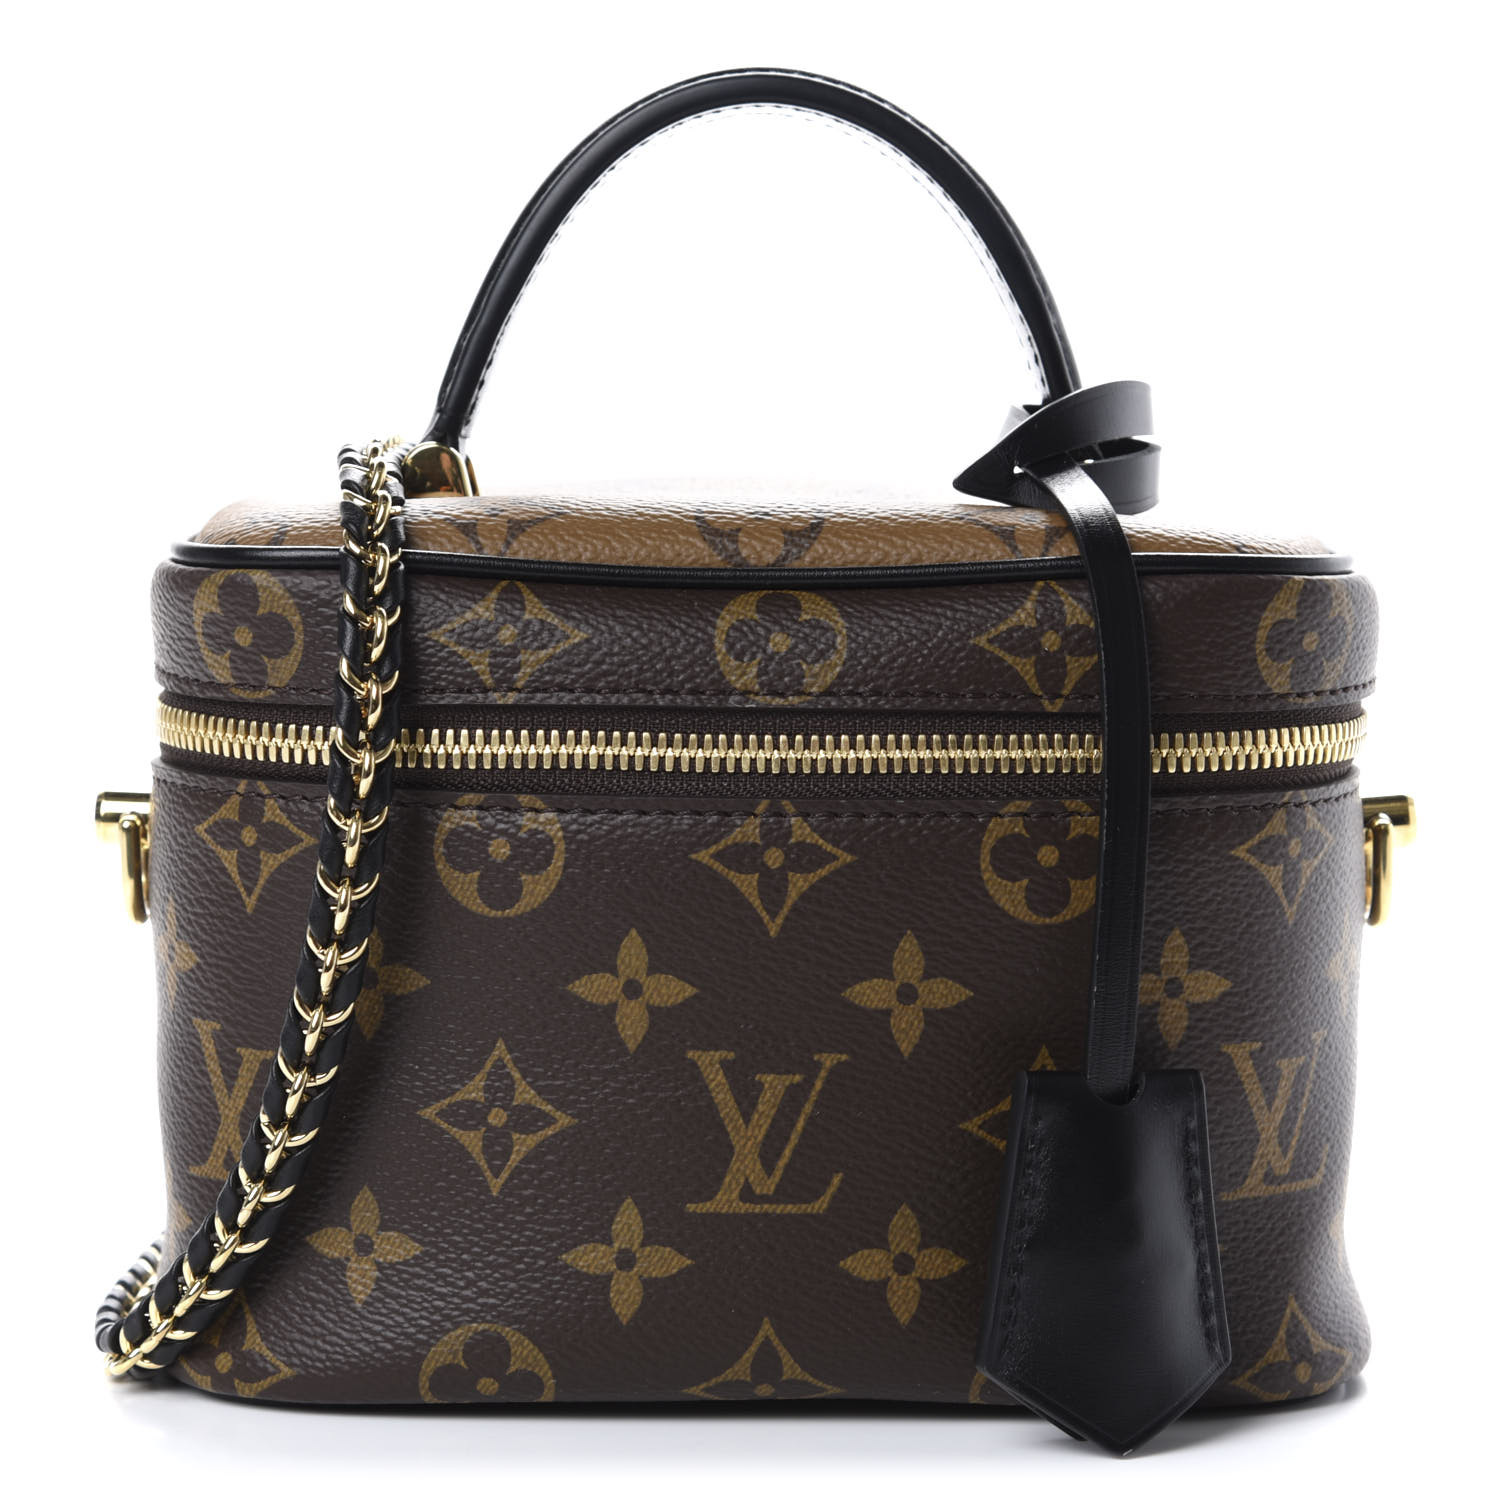 New Lv Purse 2020  Natural Resource Department